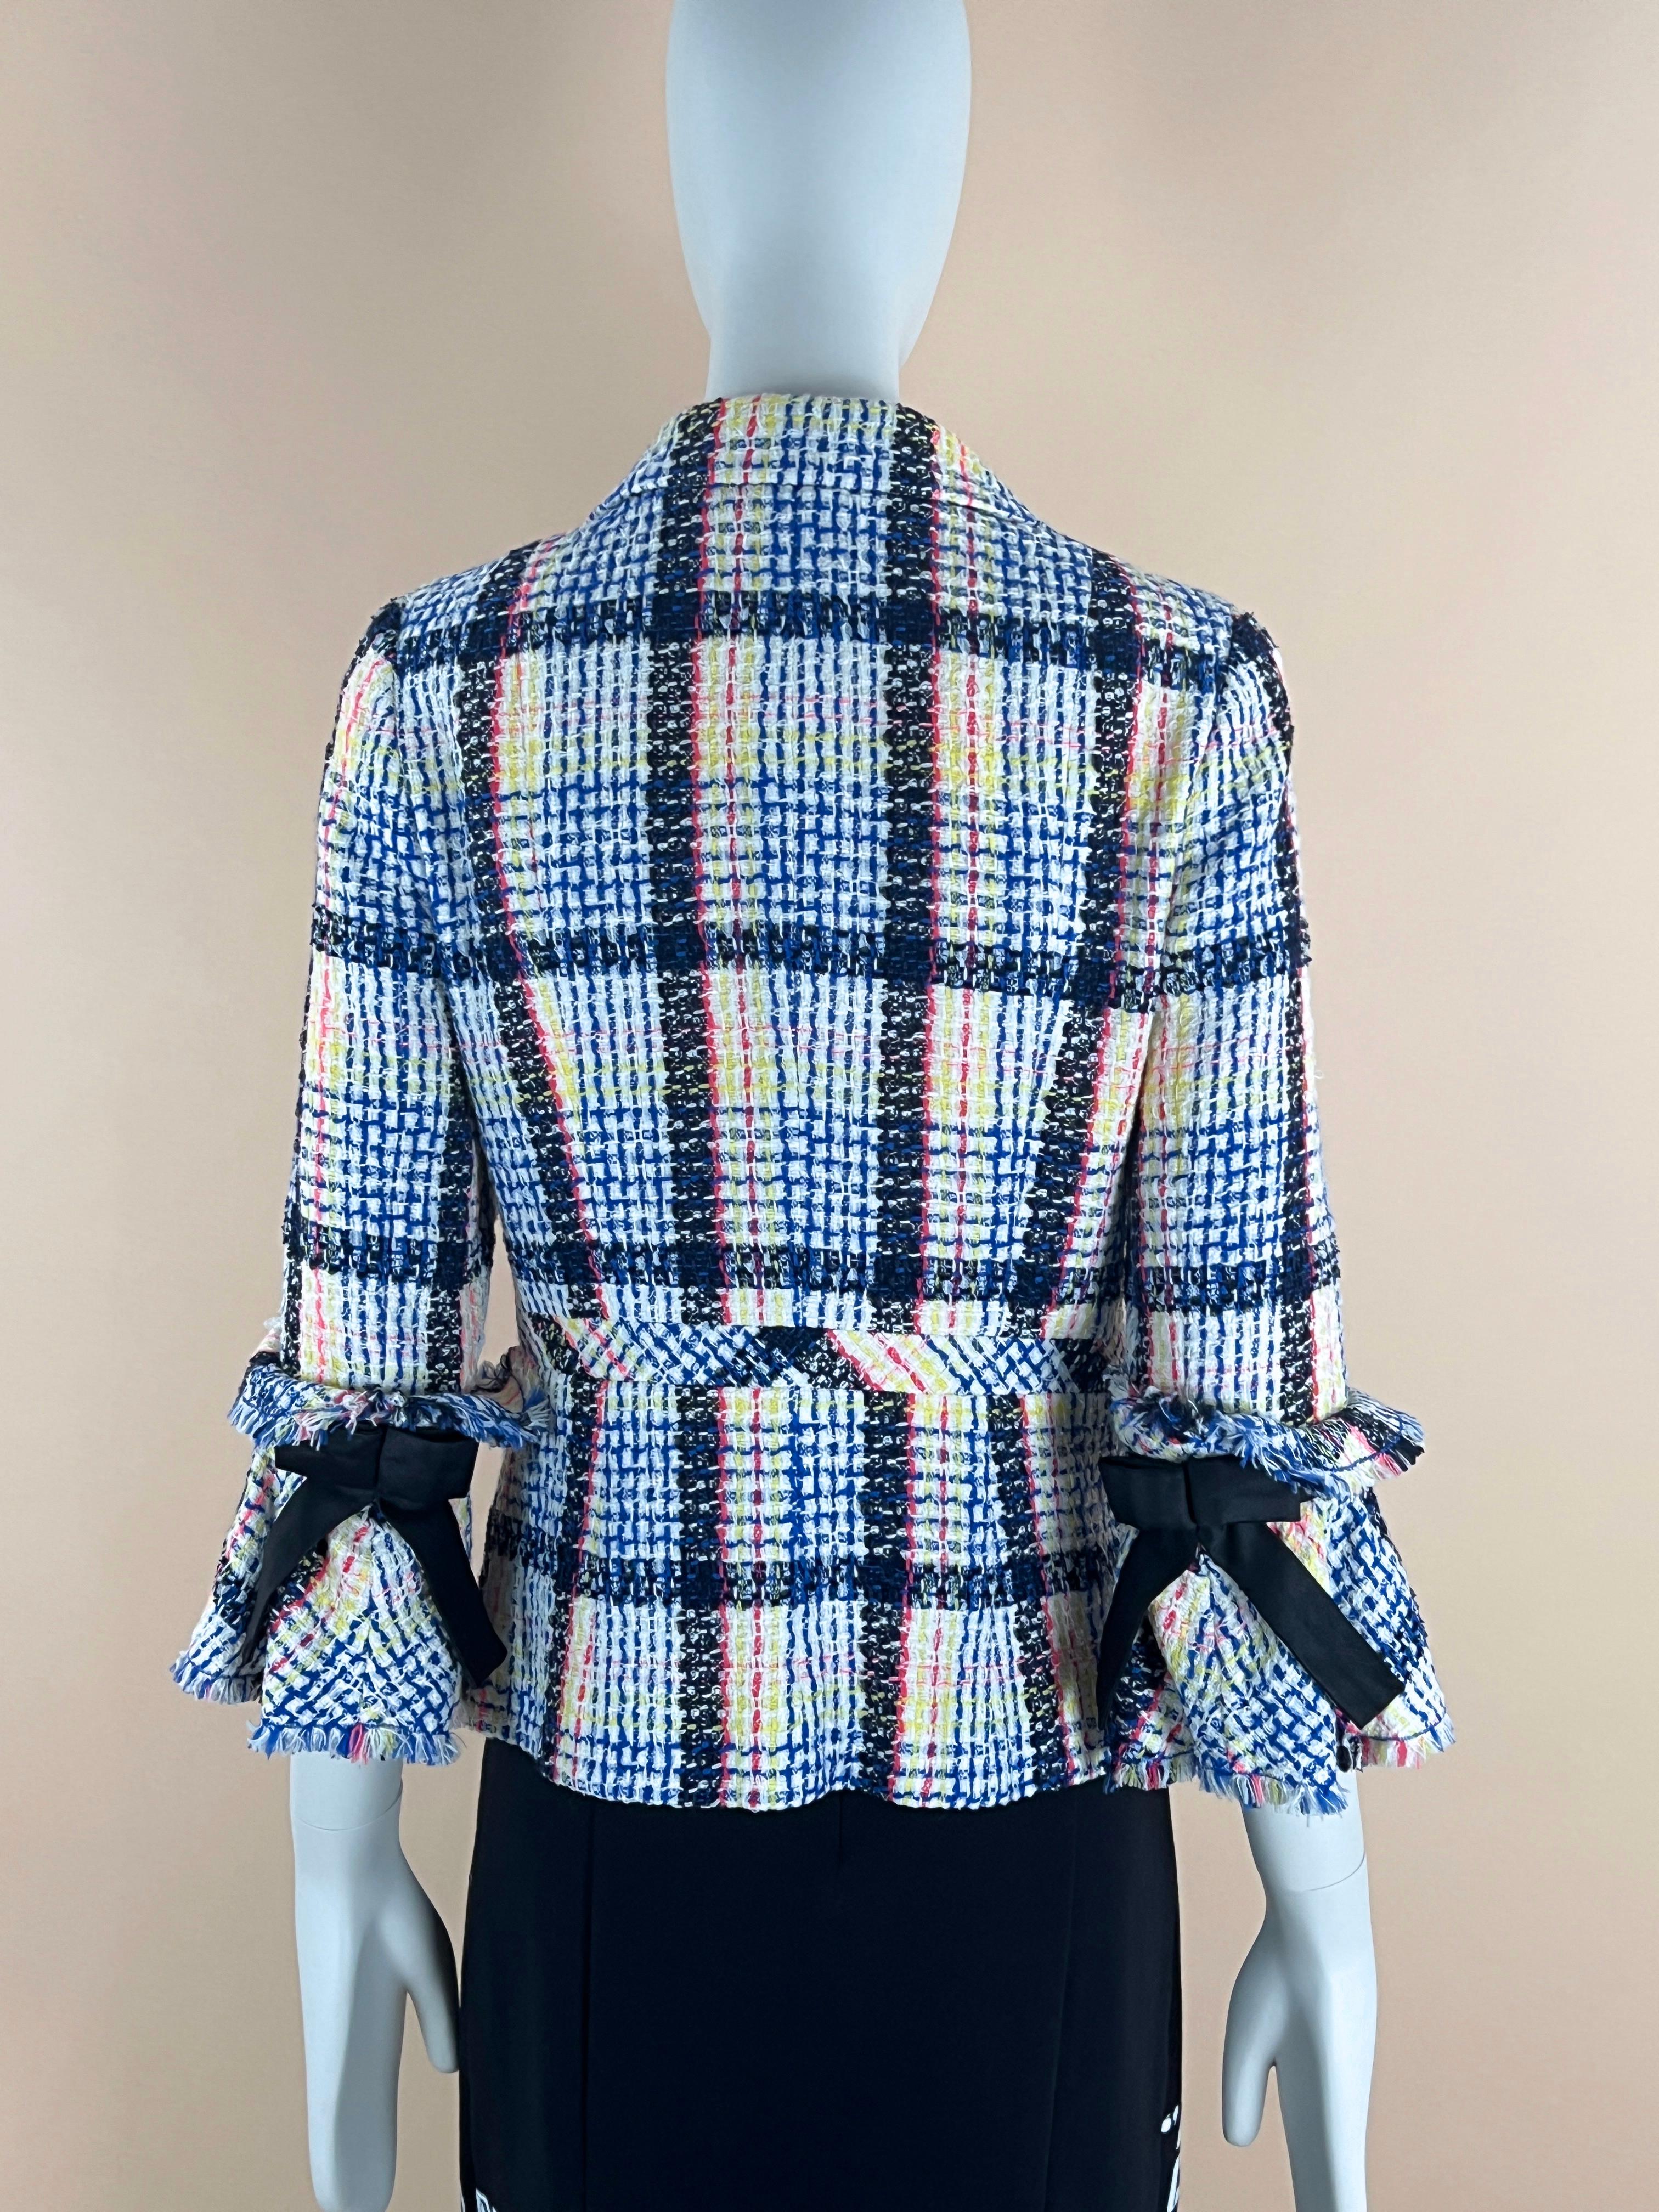 Chanel Signature Bow Detail Tweed Jacket 6